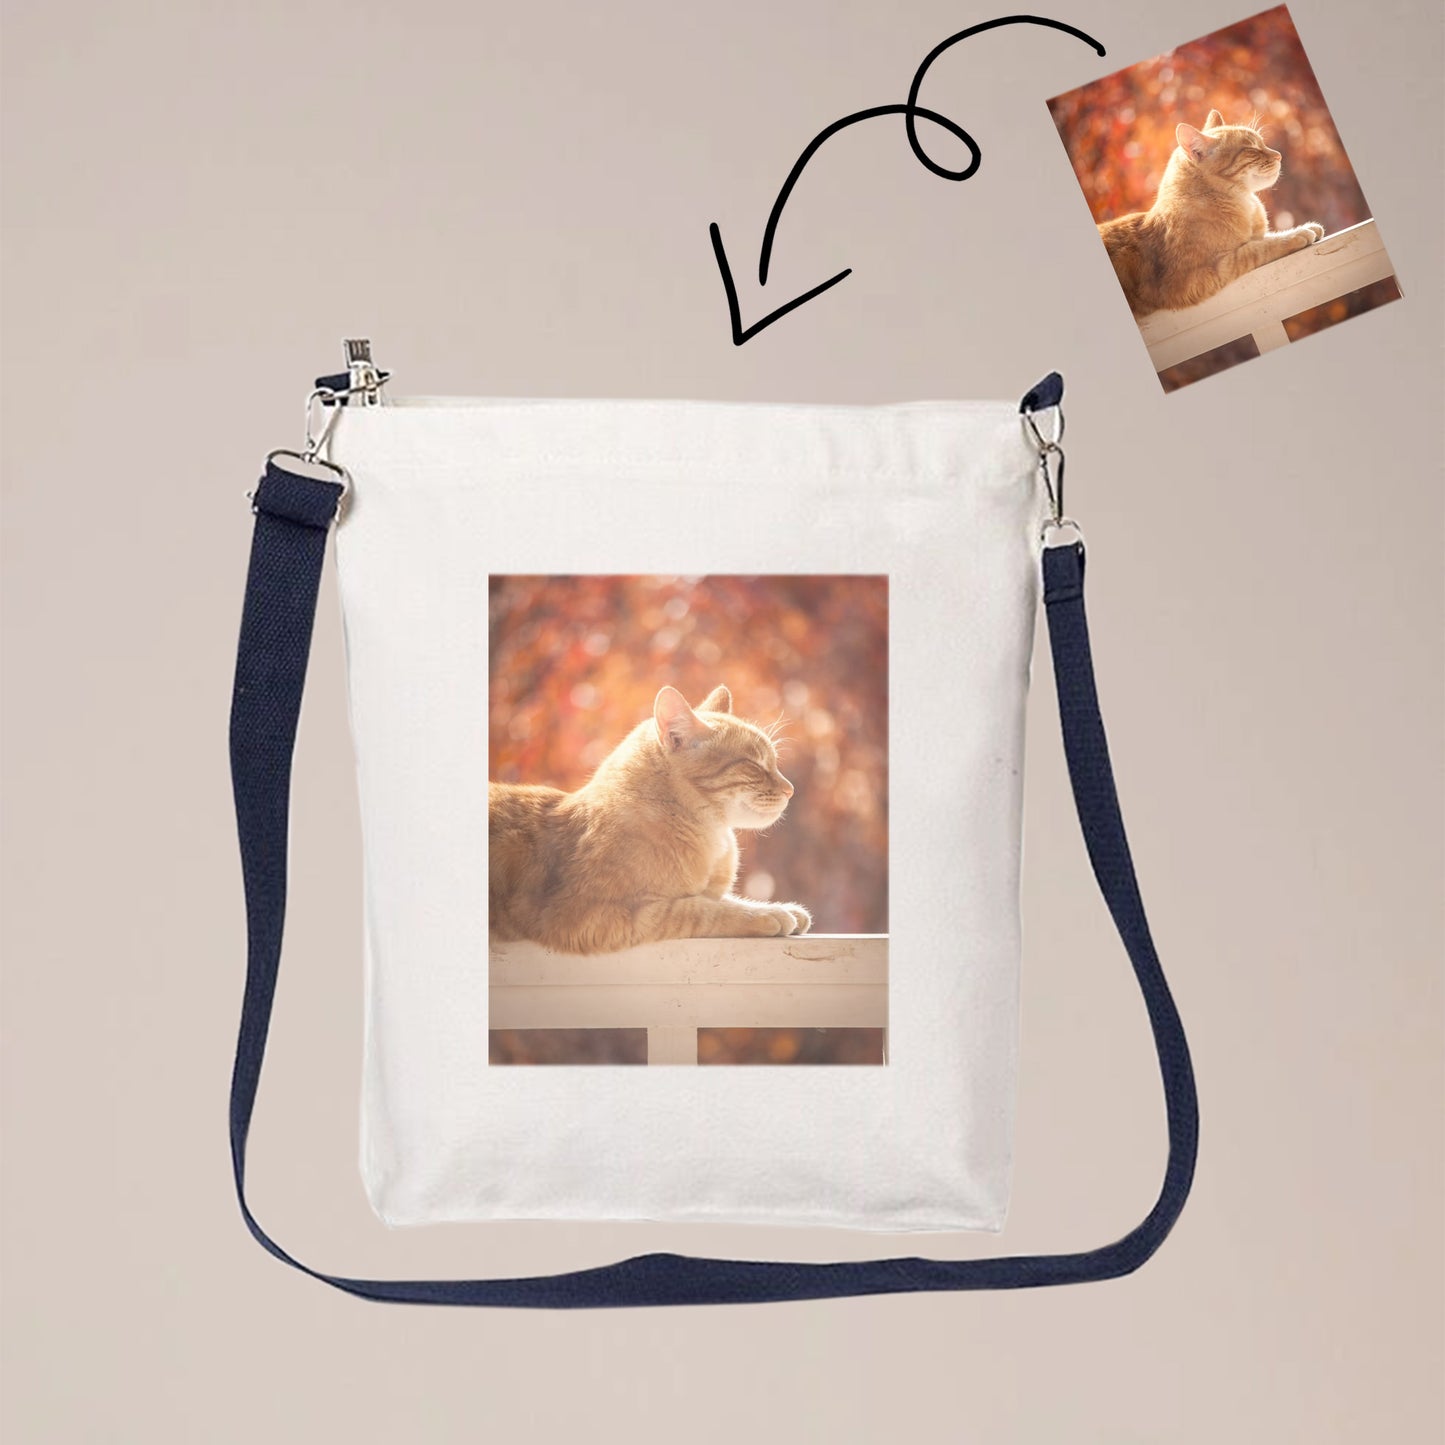 A beige canvas crossbody bag with one or two sided print with photos. The bag has a long strap that can be worn over the shoulder or across the body.